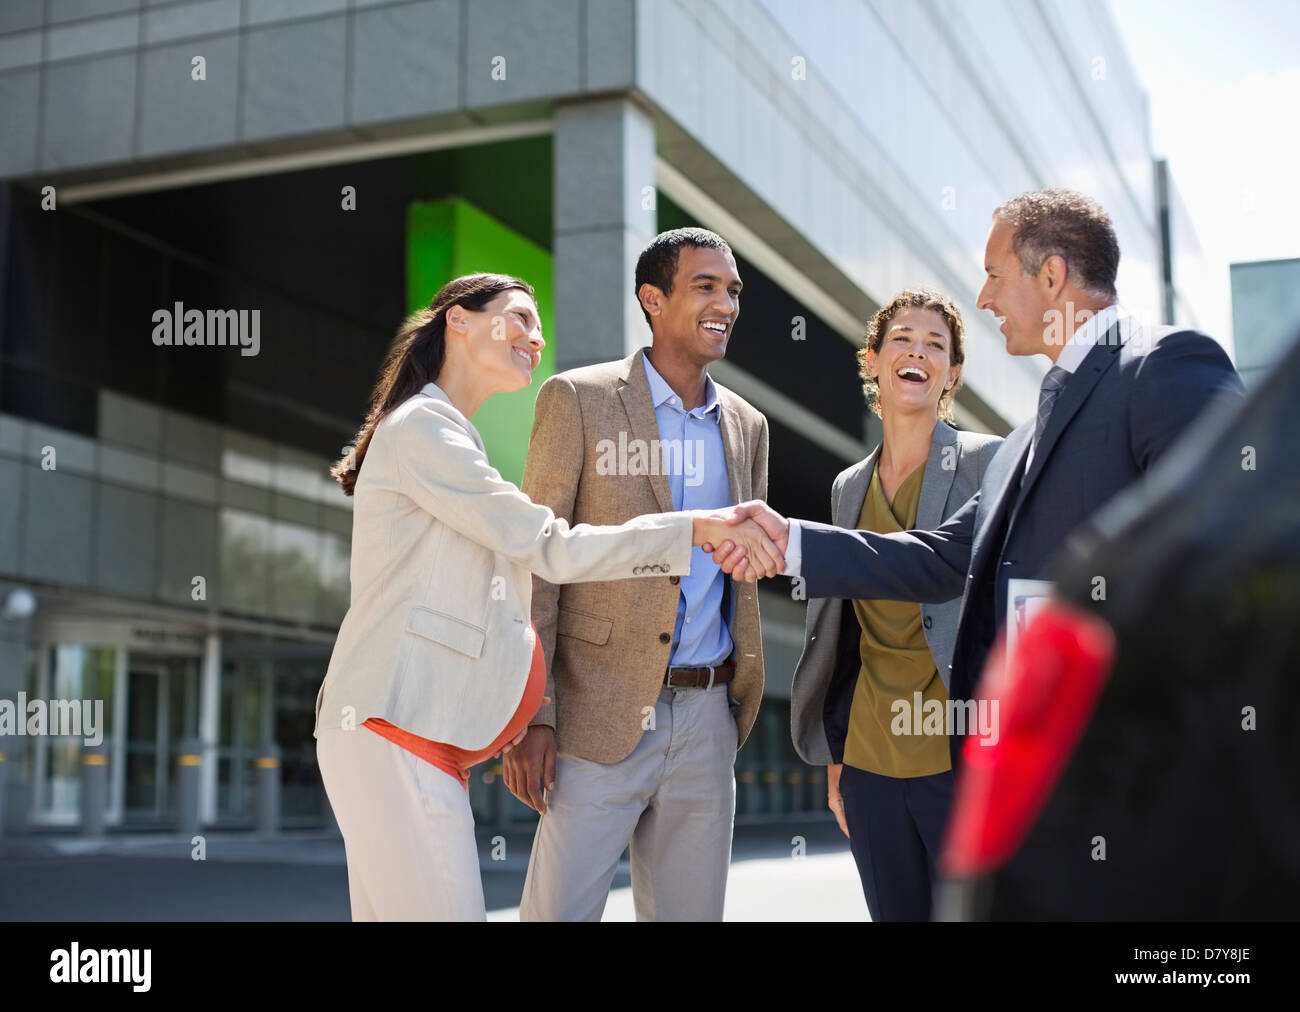 Business people shaking hands outdoors Banque D'Images